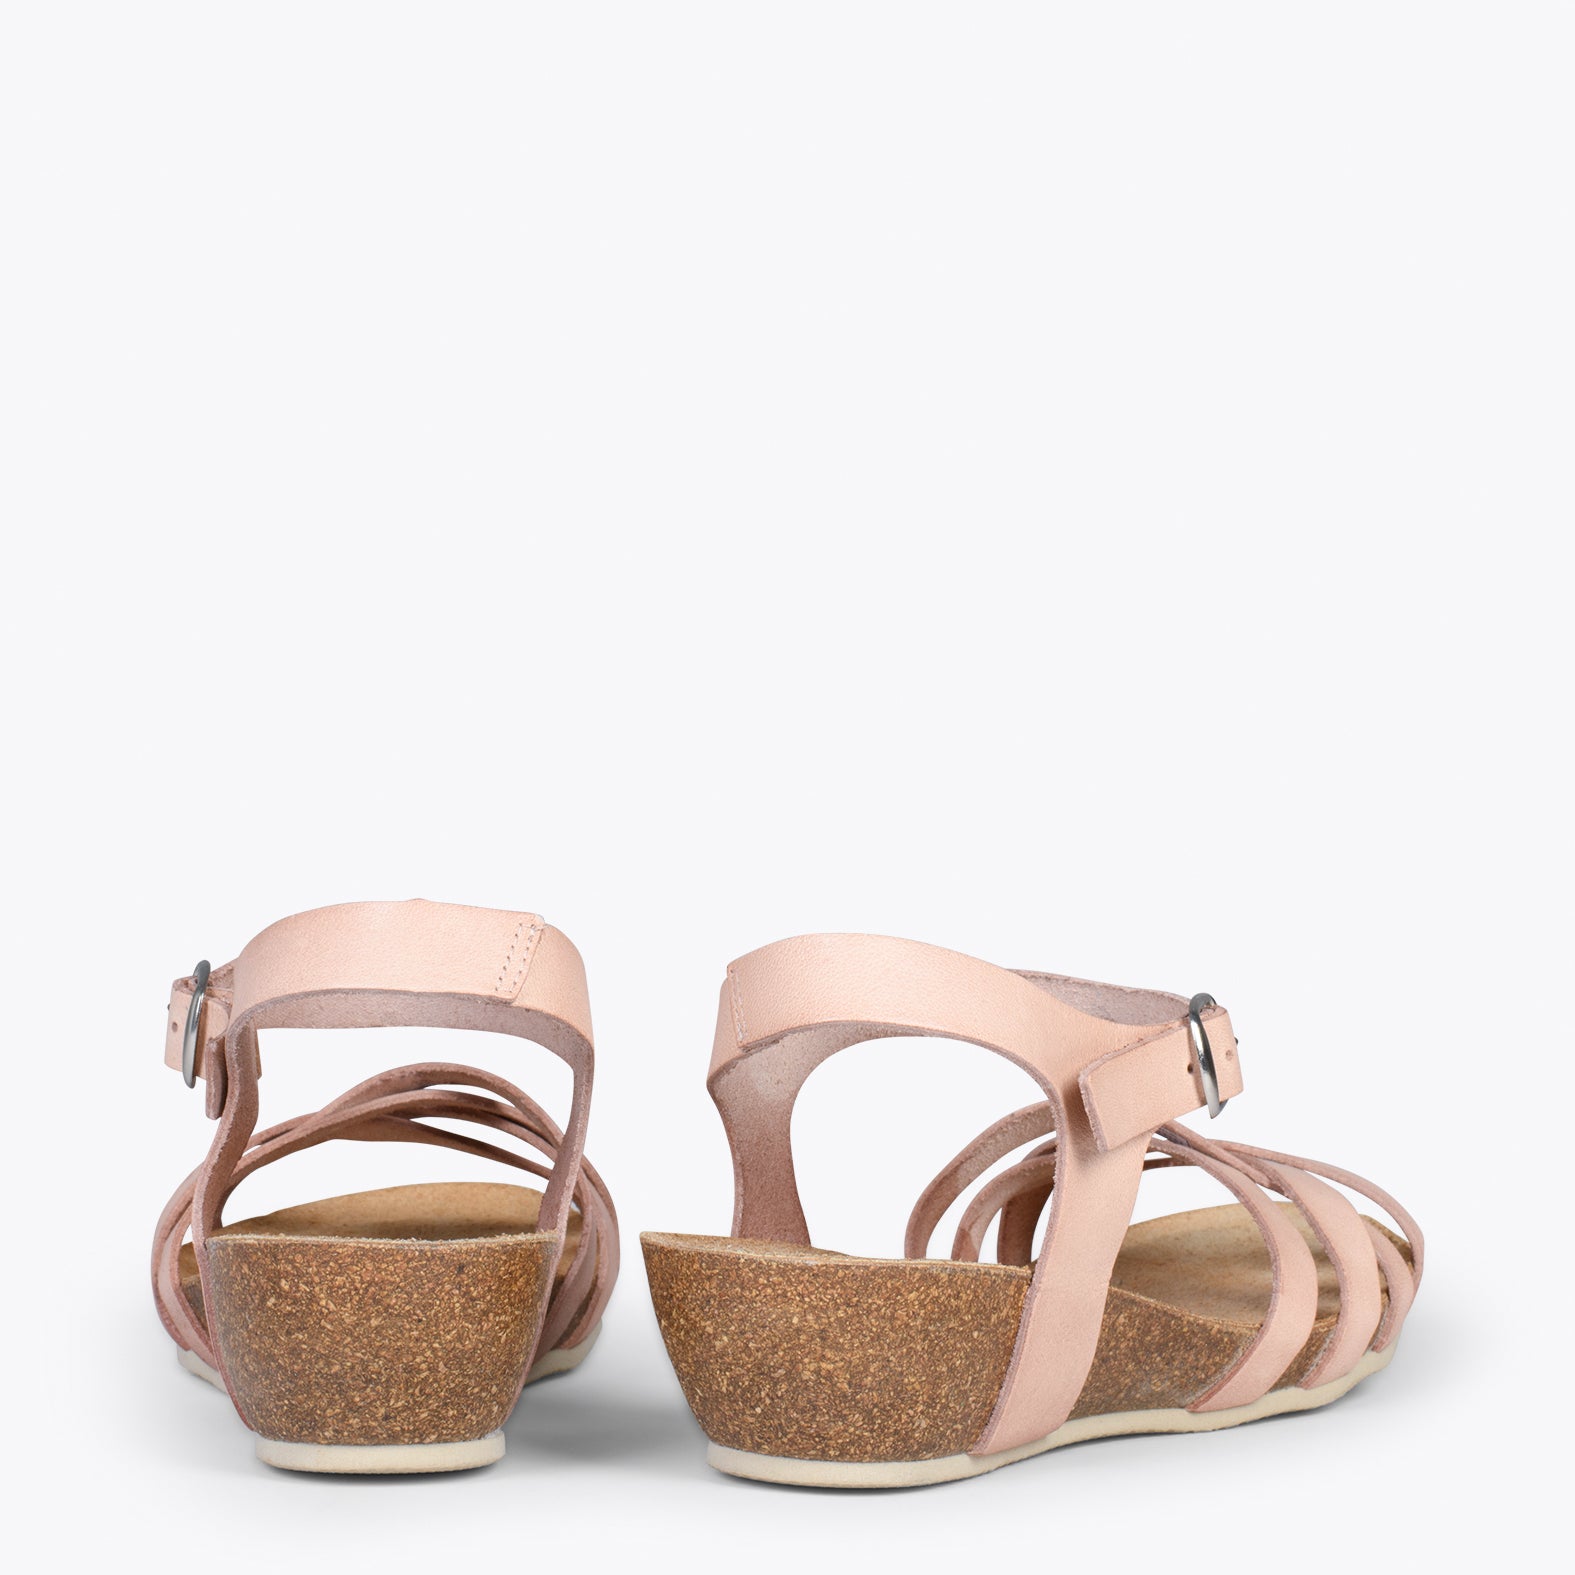 HANAE – NUDE BIO flat sandals with straps